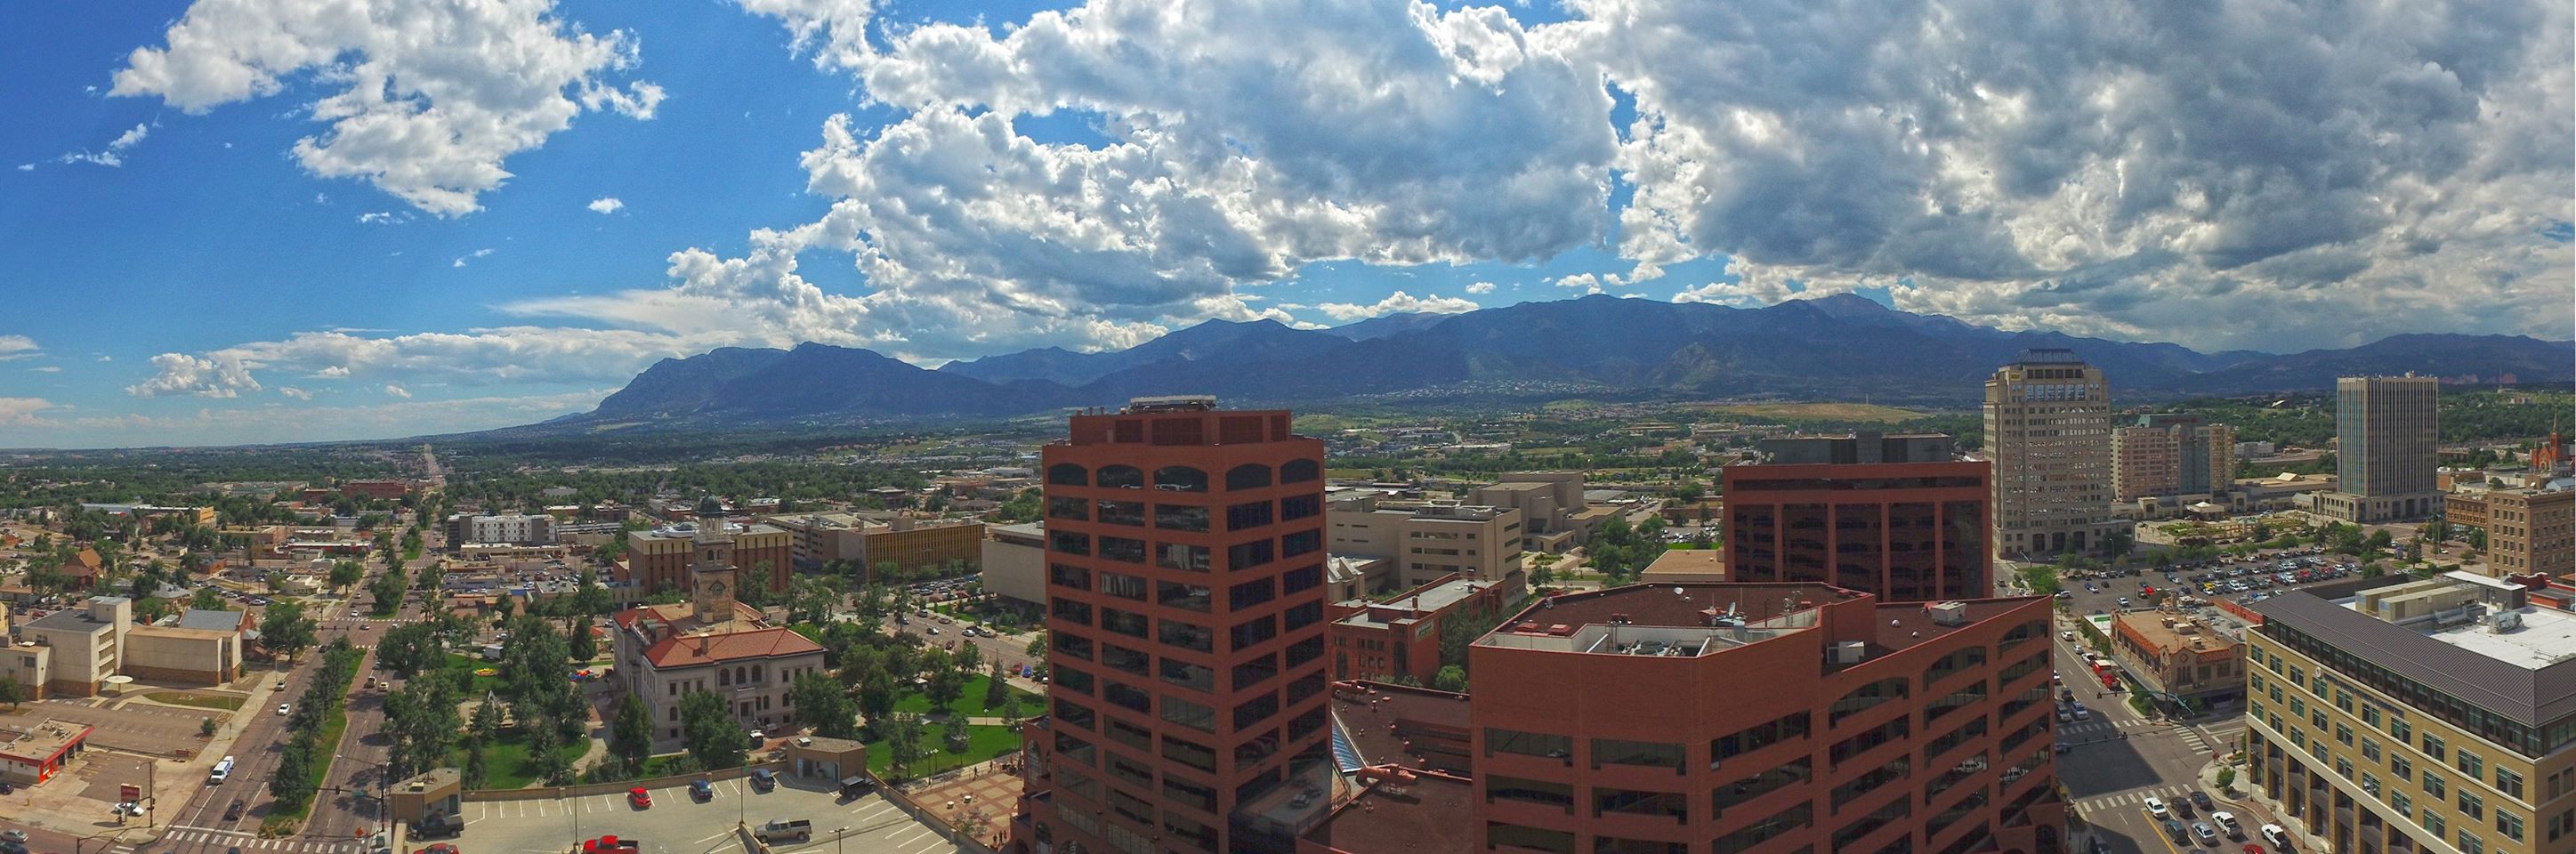 “How to Build a Global Headquarters in Colorado Springs” – Podcast with Altia CEO